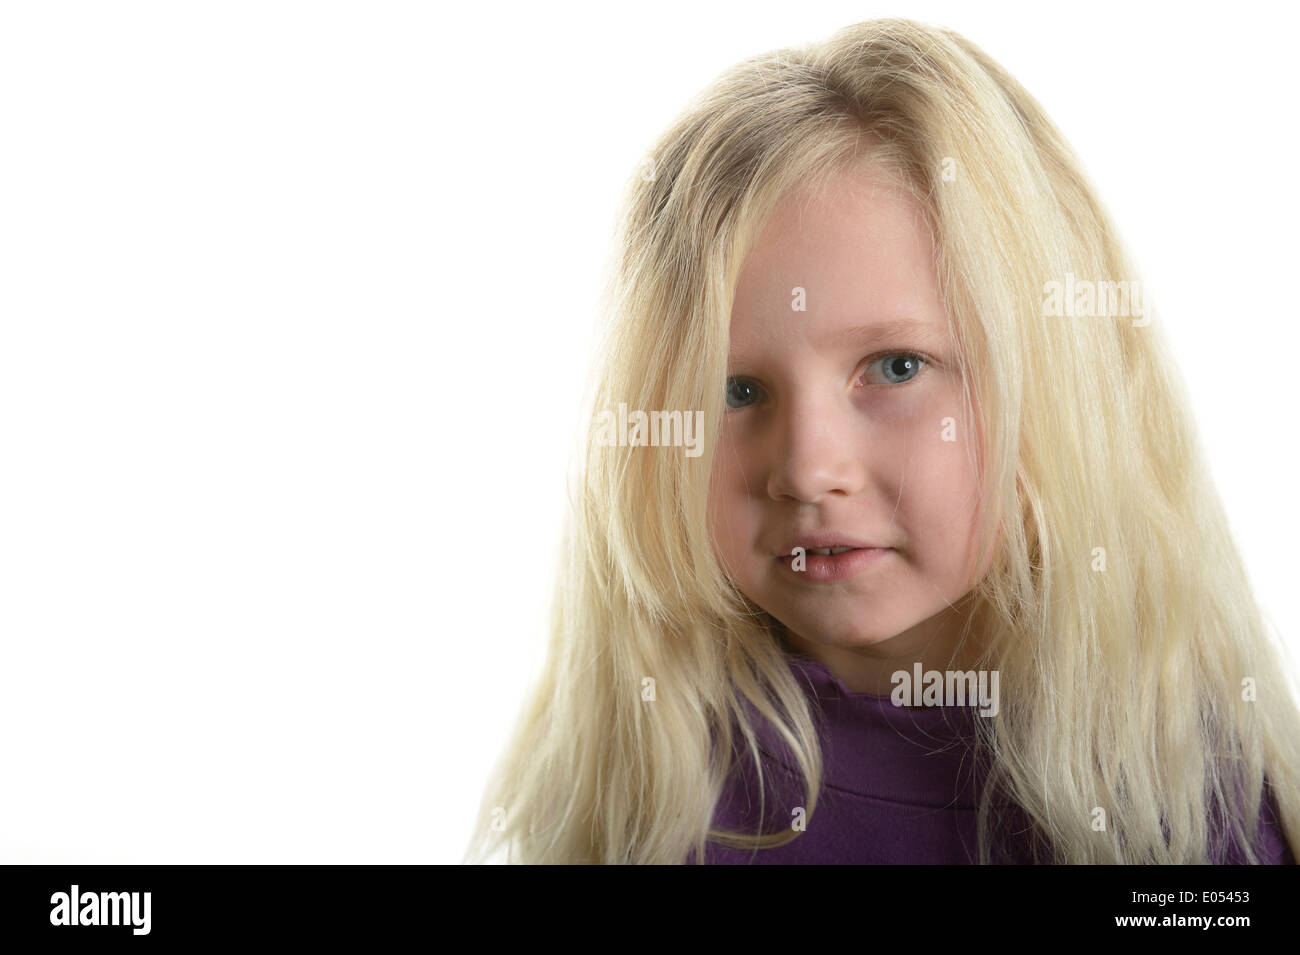 https://c8.alamy.com/comp/E05453/stock-photo-of-a-portrait-of-an-8-year-old-blond-haired-girl-E05453.jpg